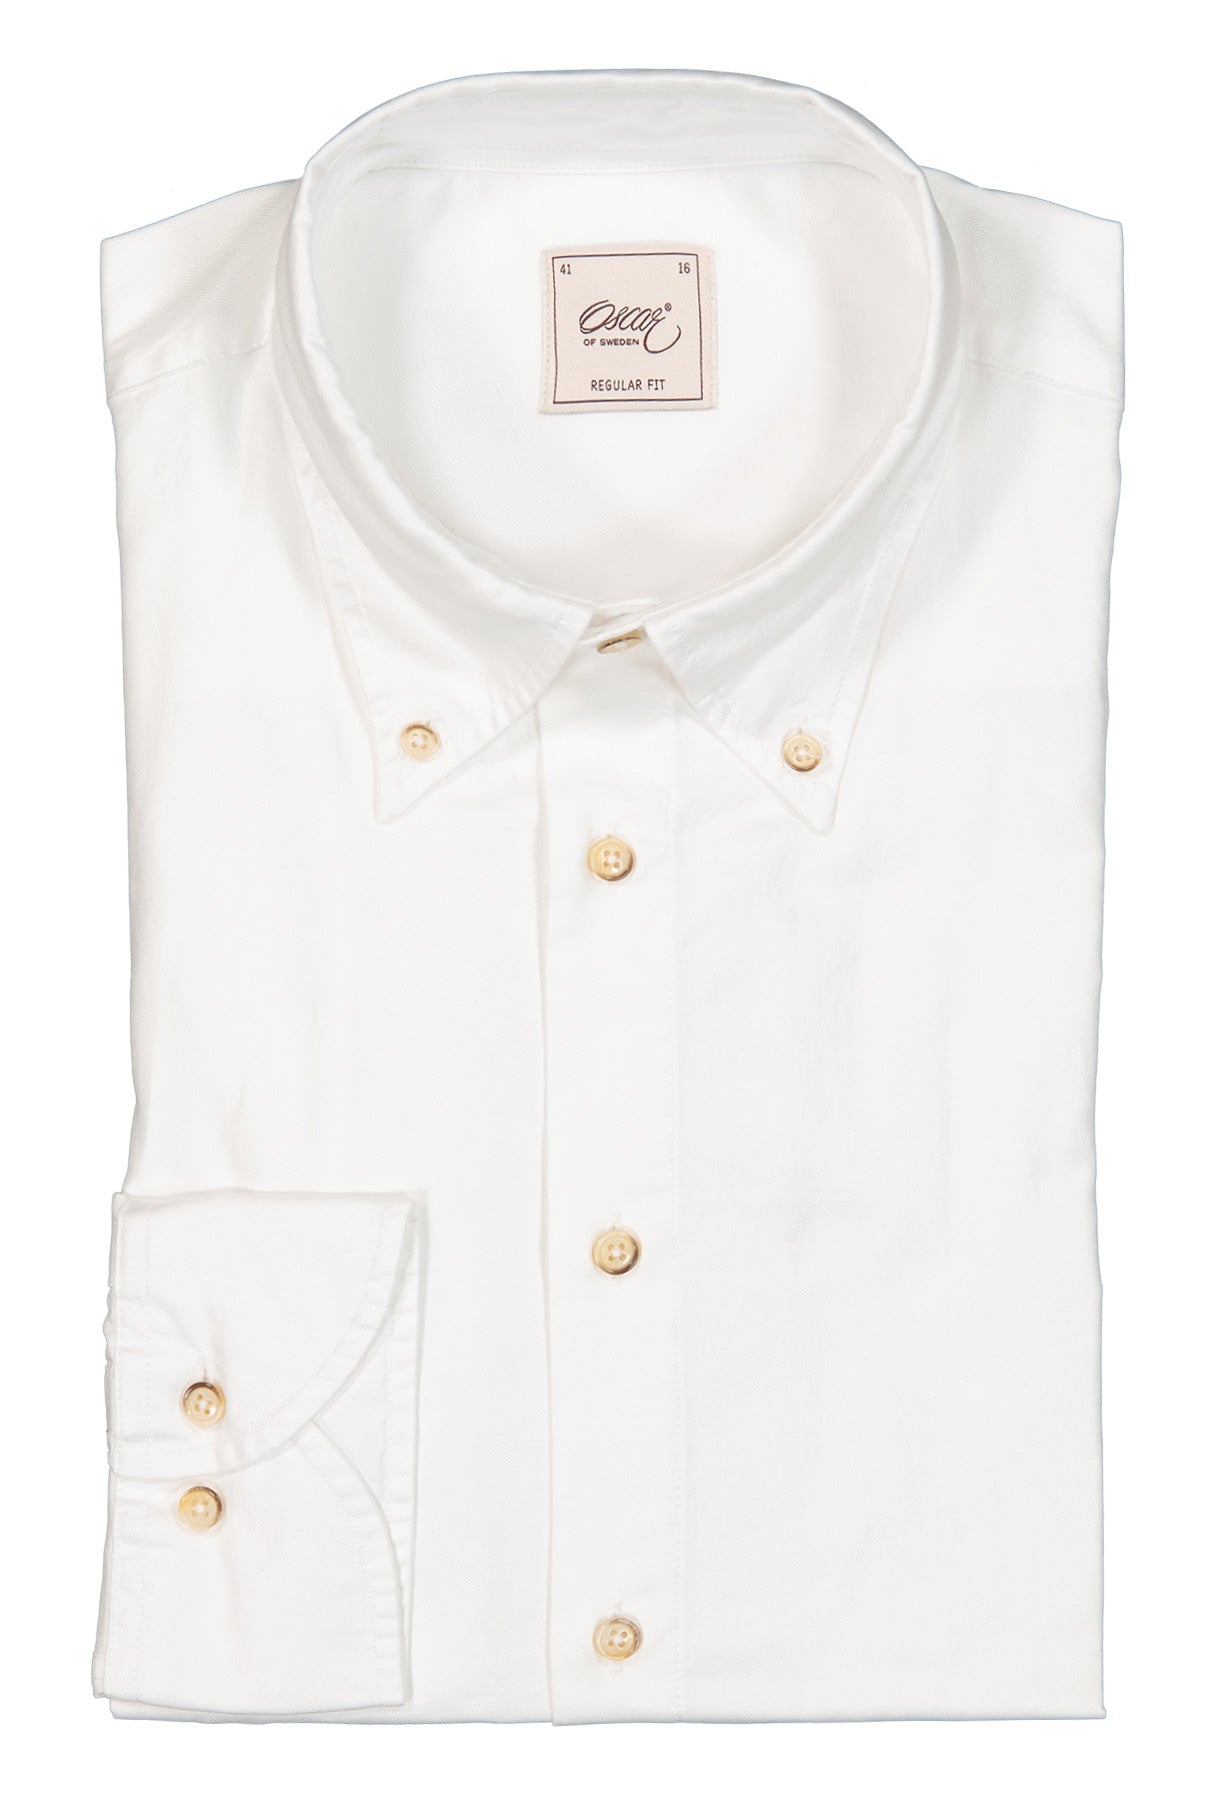 White soft washed button down regular fit shirt